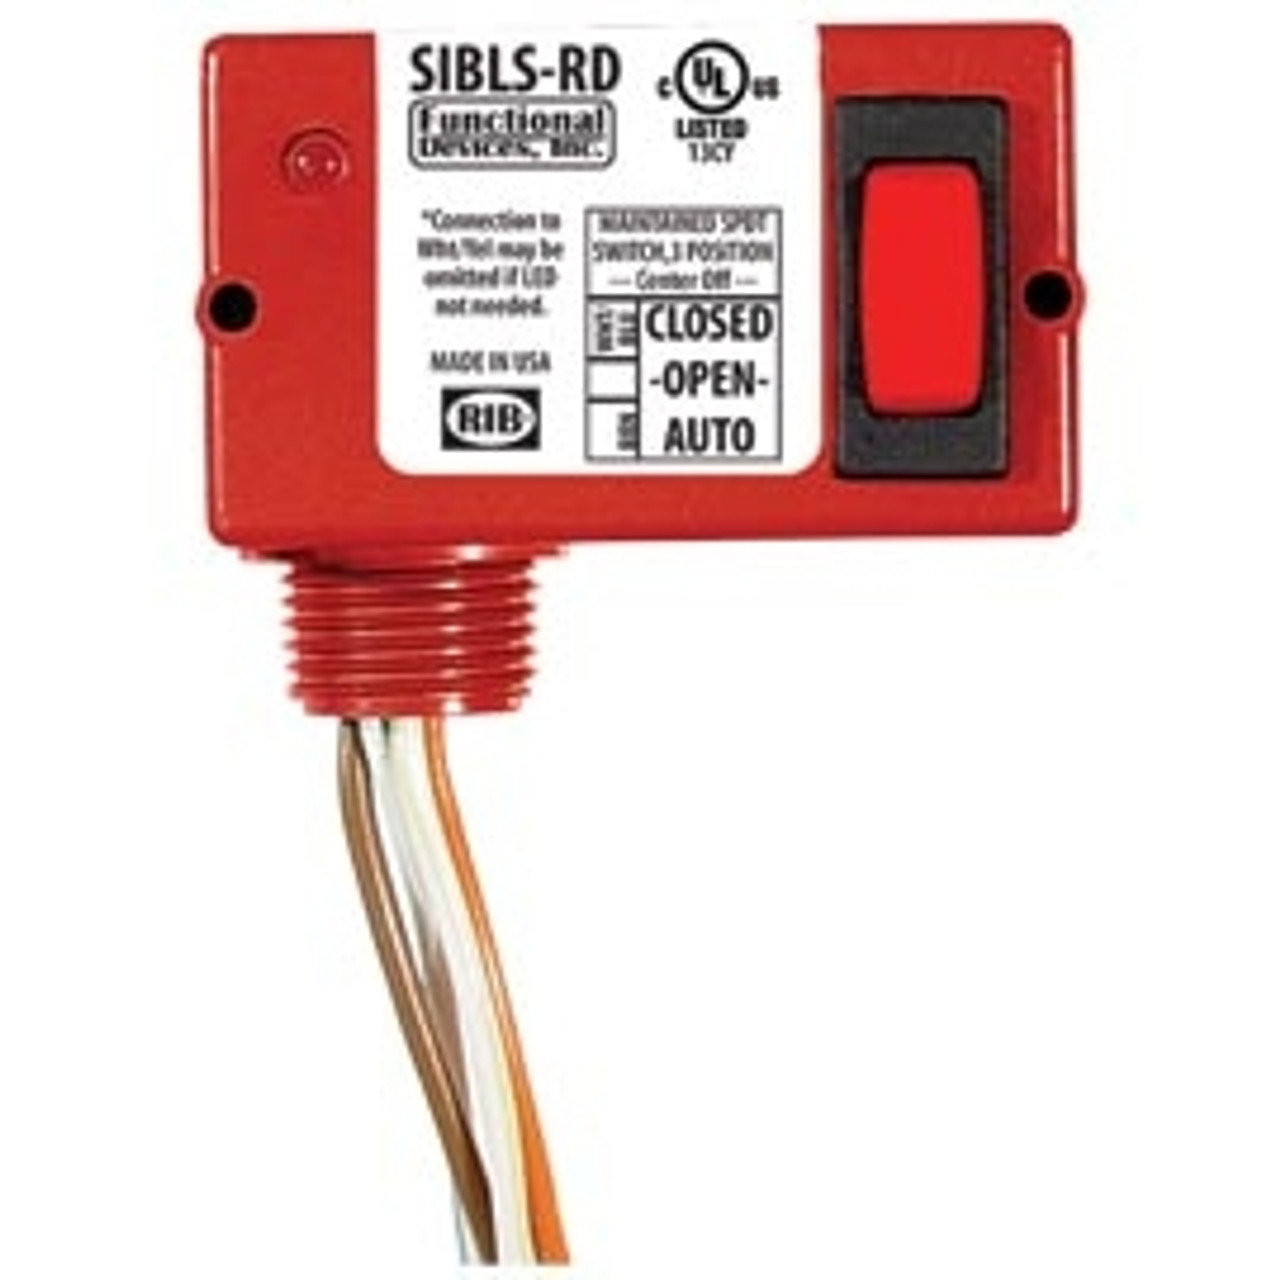 FUNCTIONAL DEVICES FUNSIBLS-RD Enclosed Switch 30Vac/dc Max maintained 3 position center off W/LED Red Hsg